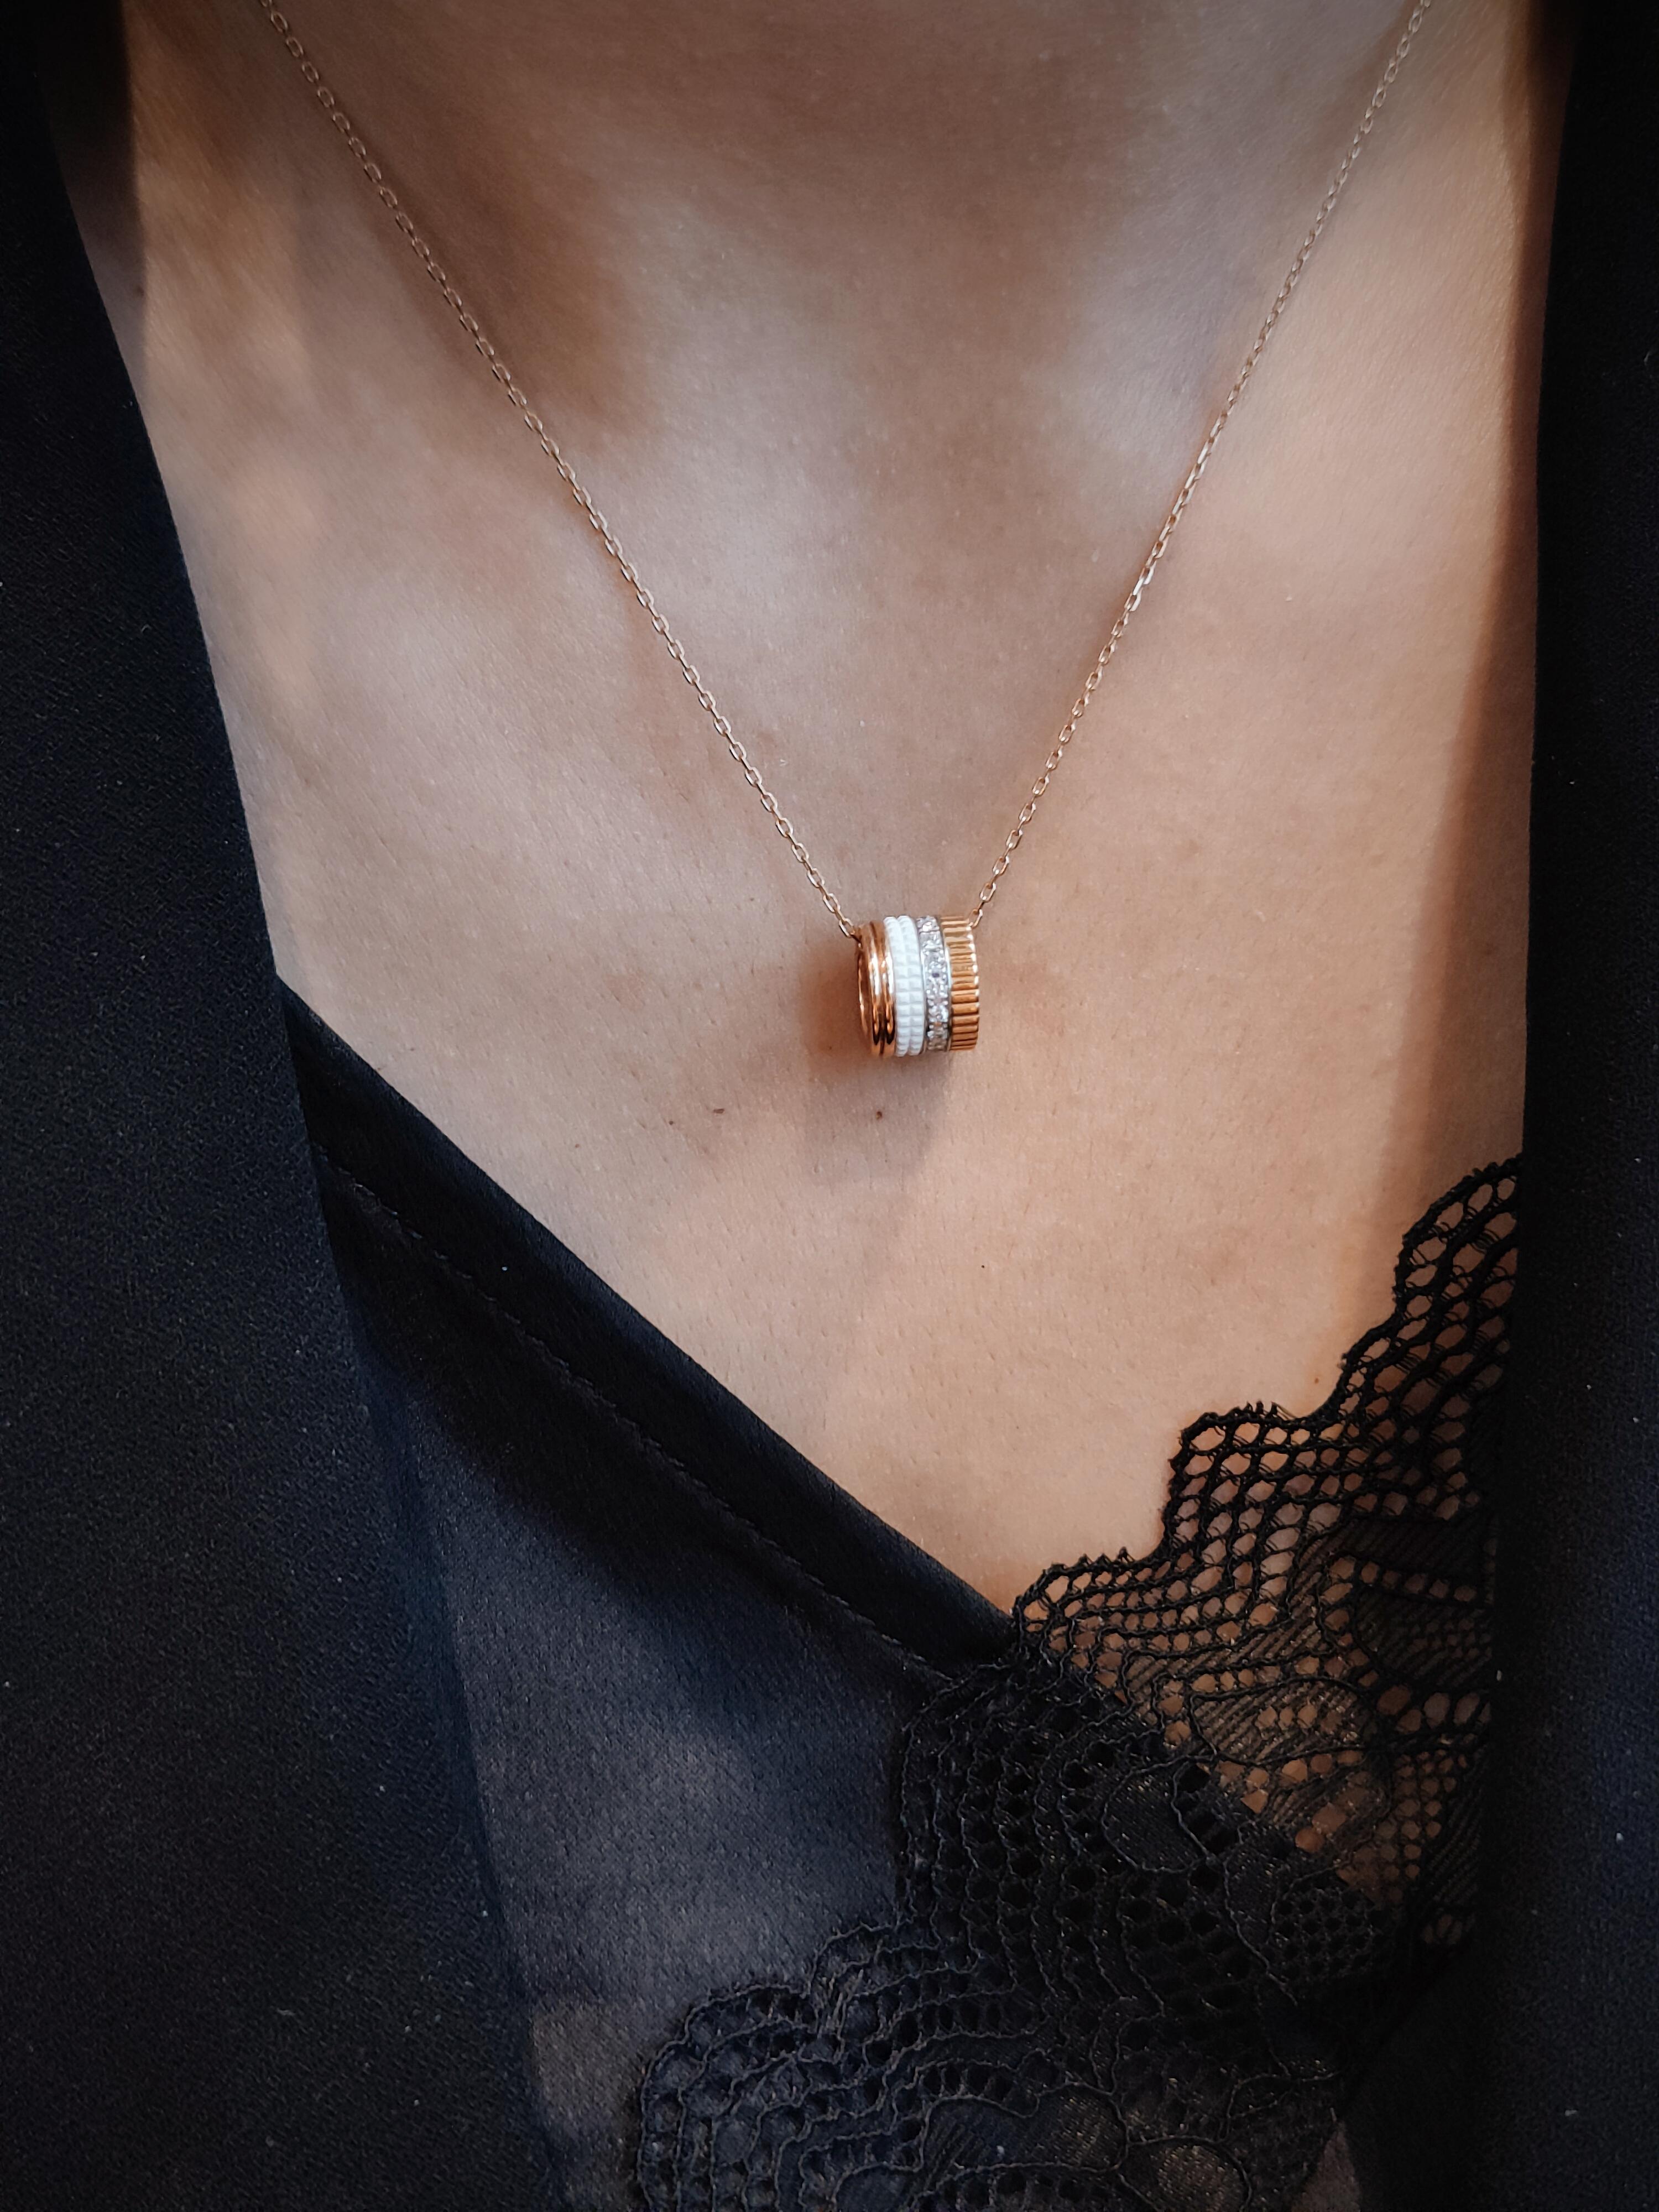 18 karat pink gold necklace from the iconic Quatre Collection by Boucheron

The Quatre White Edition brings a hint of freshness with the ceramic, which illuminates the clou de Paris motif. Extremely refined, this feminine and elegant pendant is